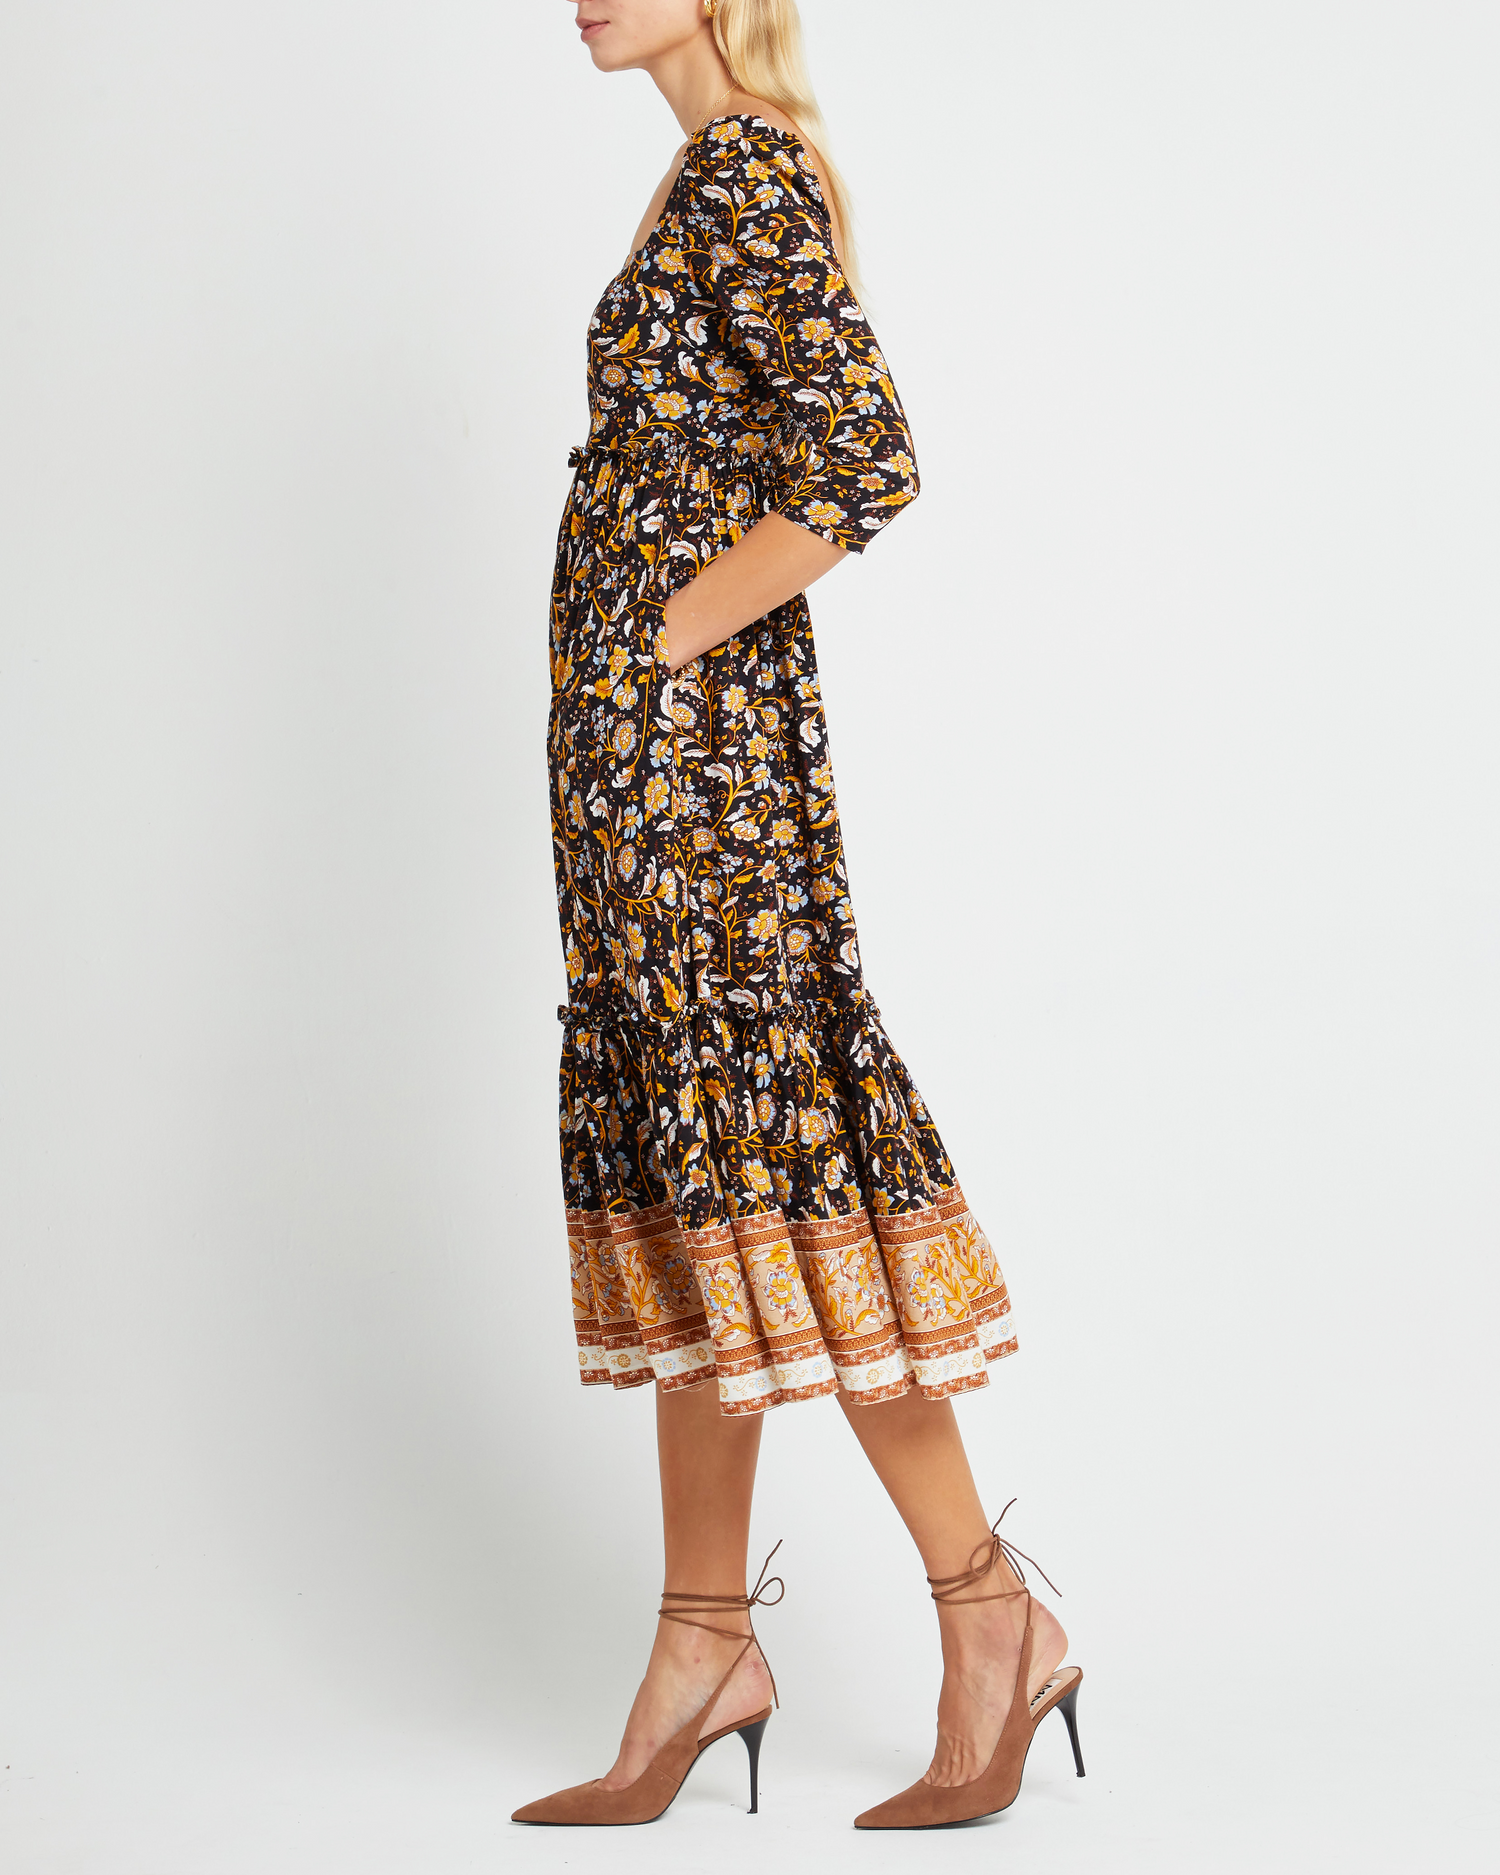 Fifth image of Willow Dress, a floral midi dress, floral, square neckline, 3/4 sleeves, fall, floral, pockets